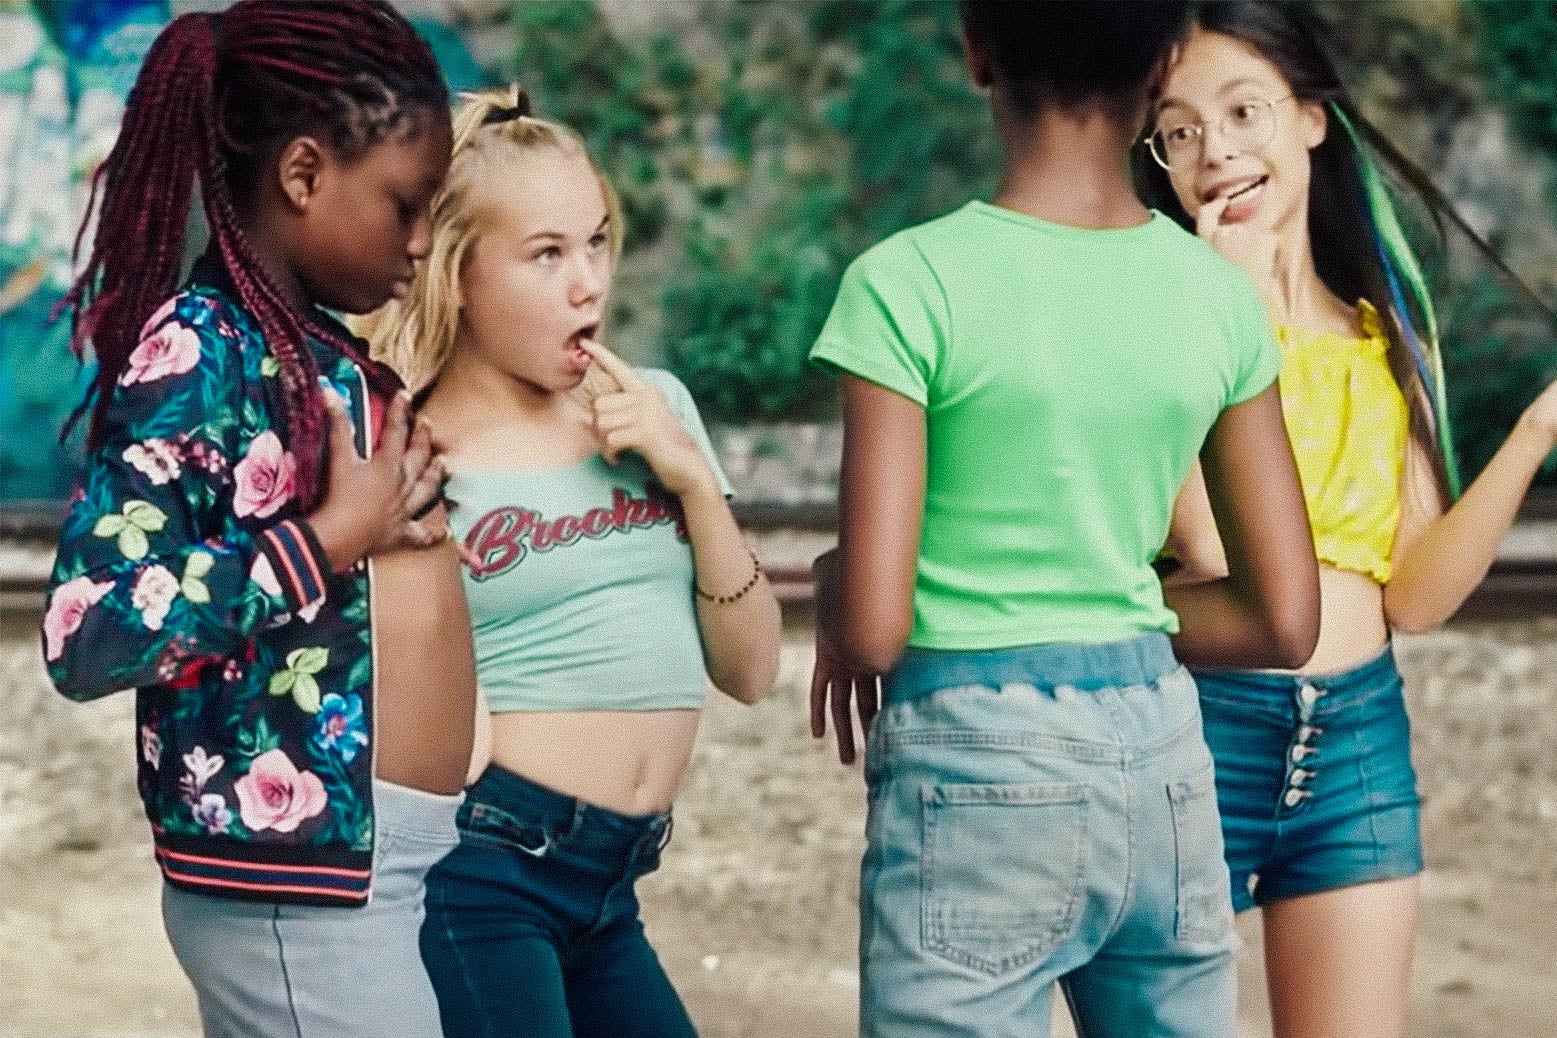 Four tween girls stand around, as one puts her finger in her mouth and another puts her hands on her chest.